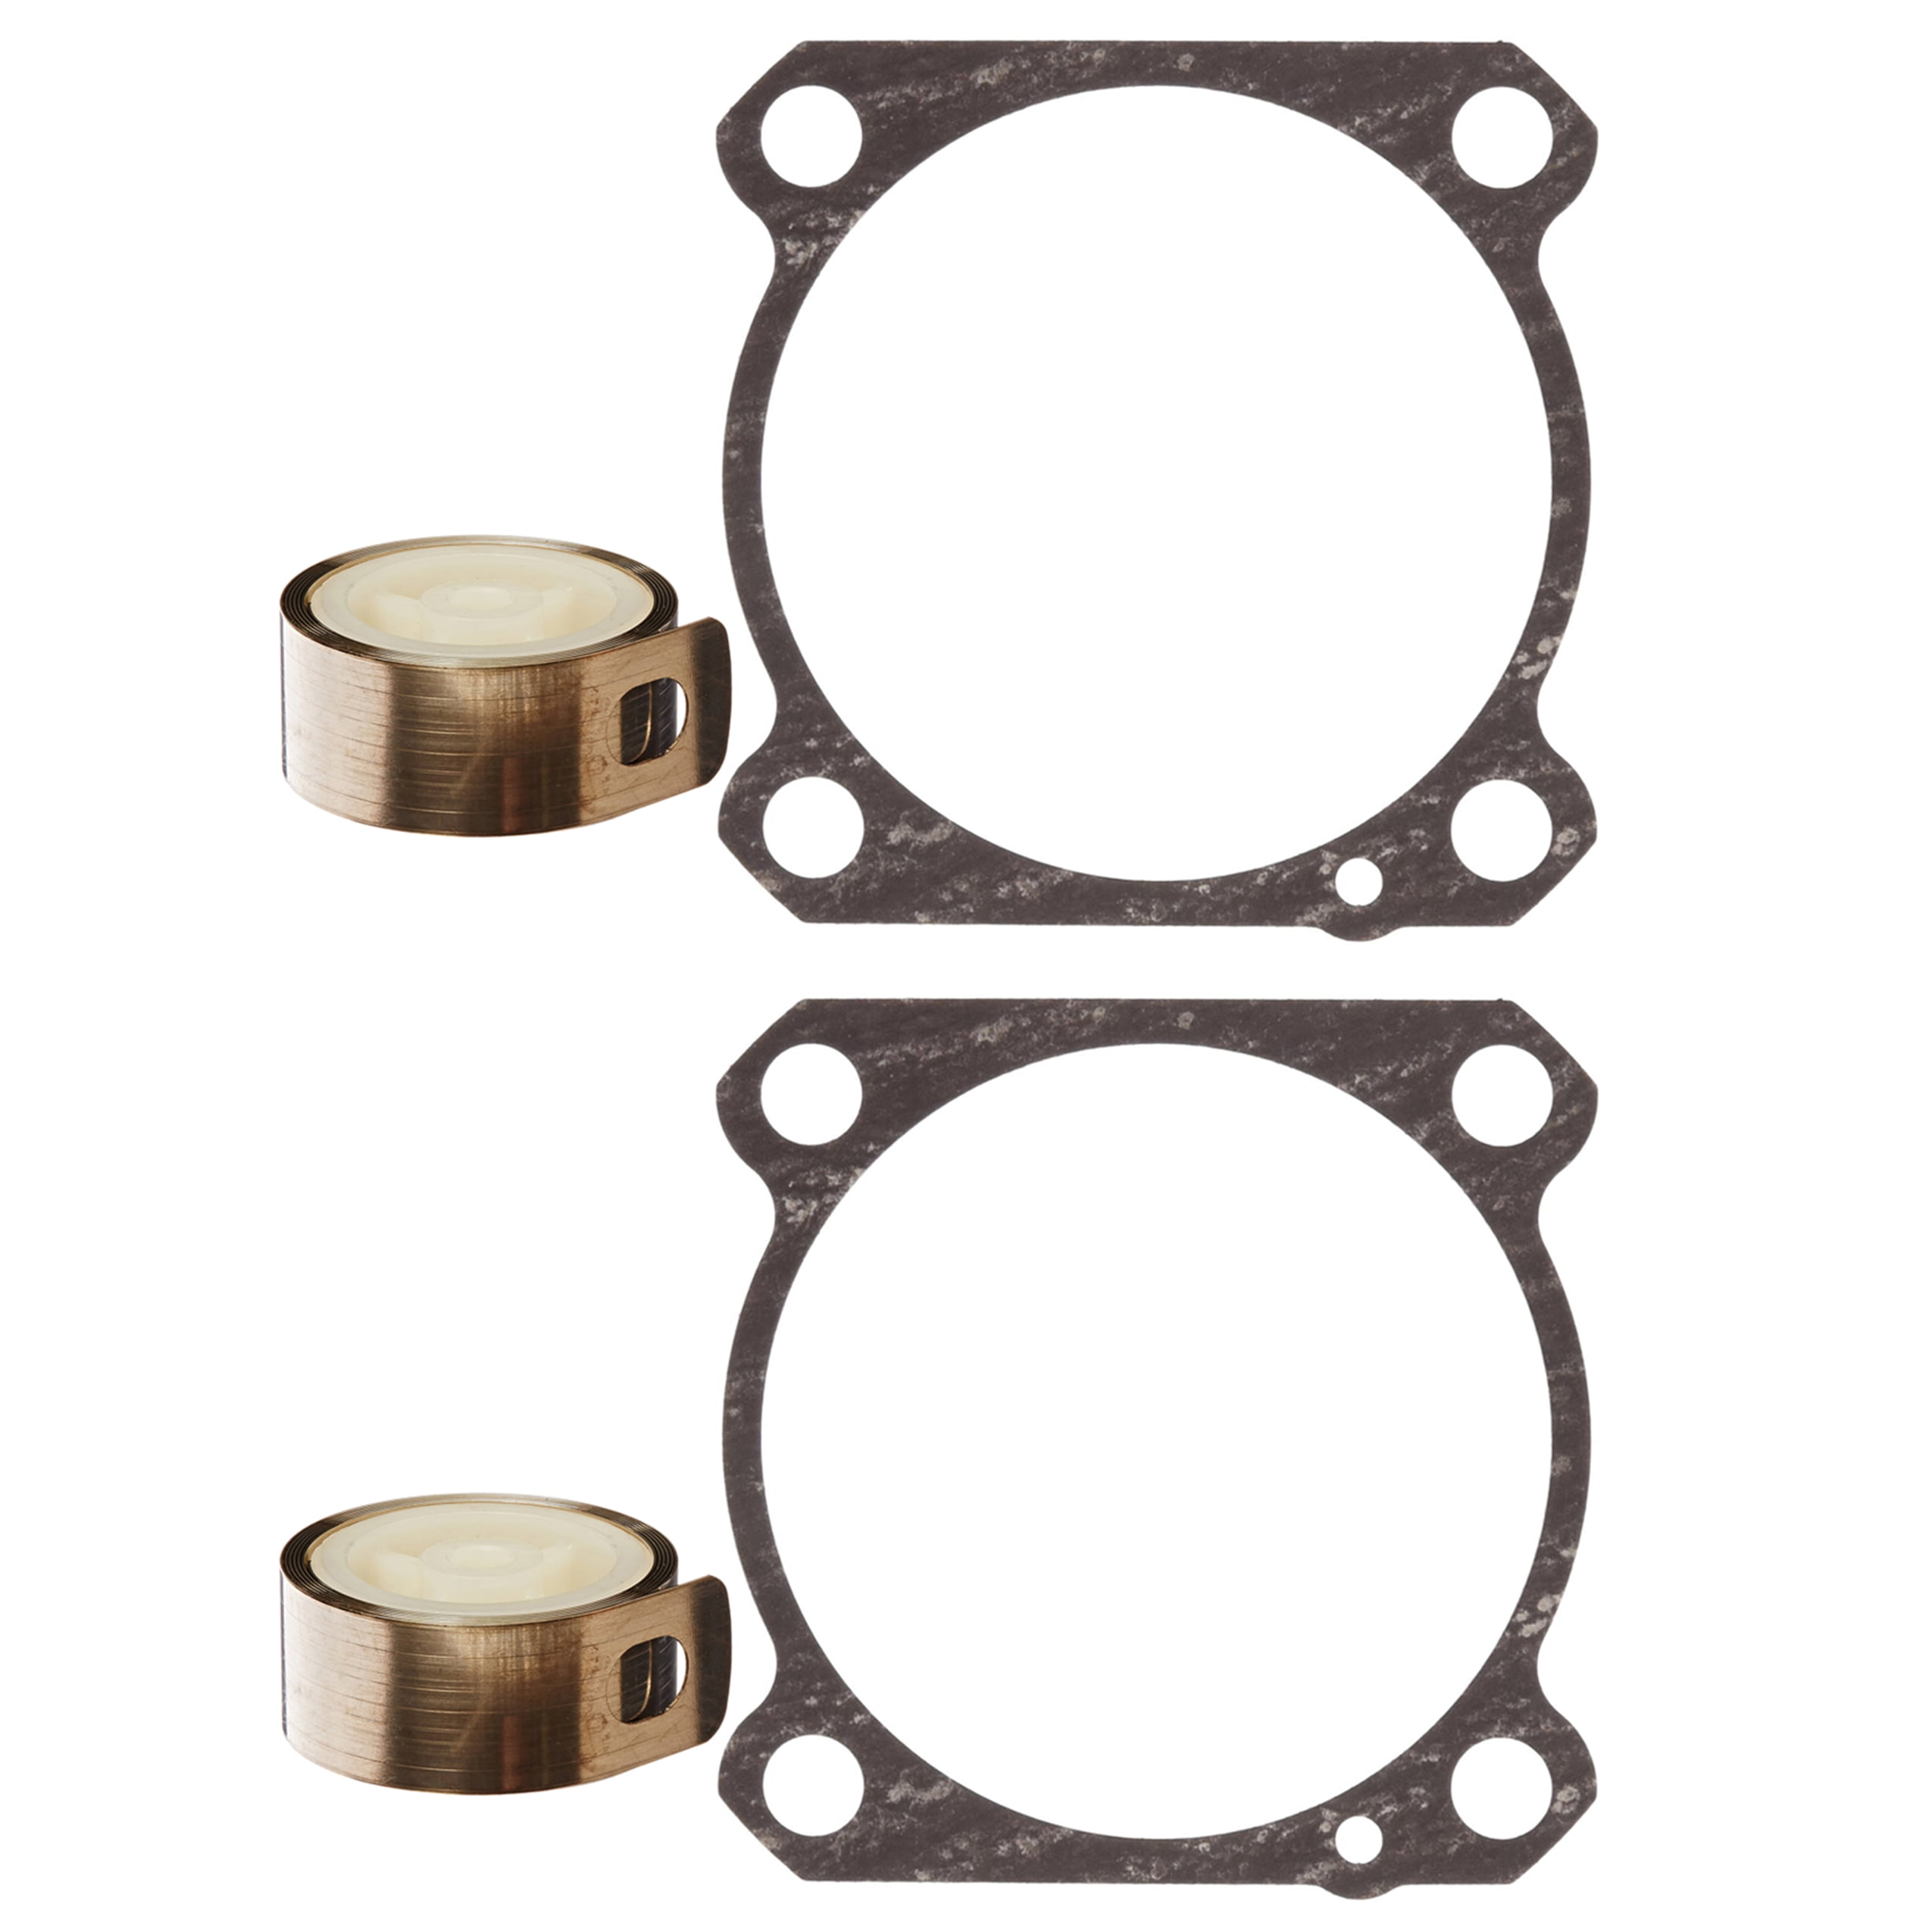 A Gasket for Hitachi 877334 for NR83A5 NR83AA NR83AA2 877-334 2 PACK 